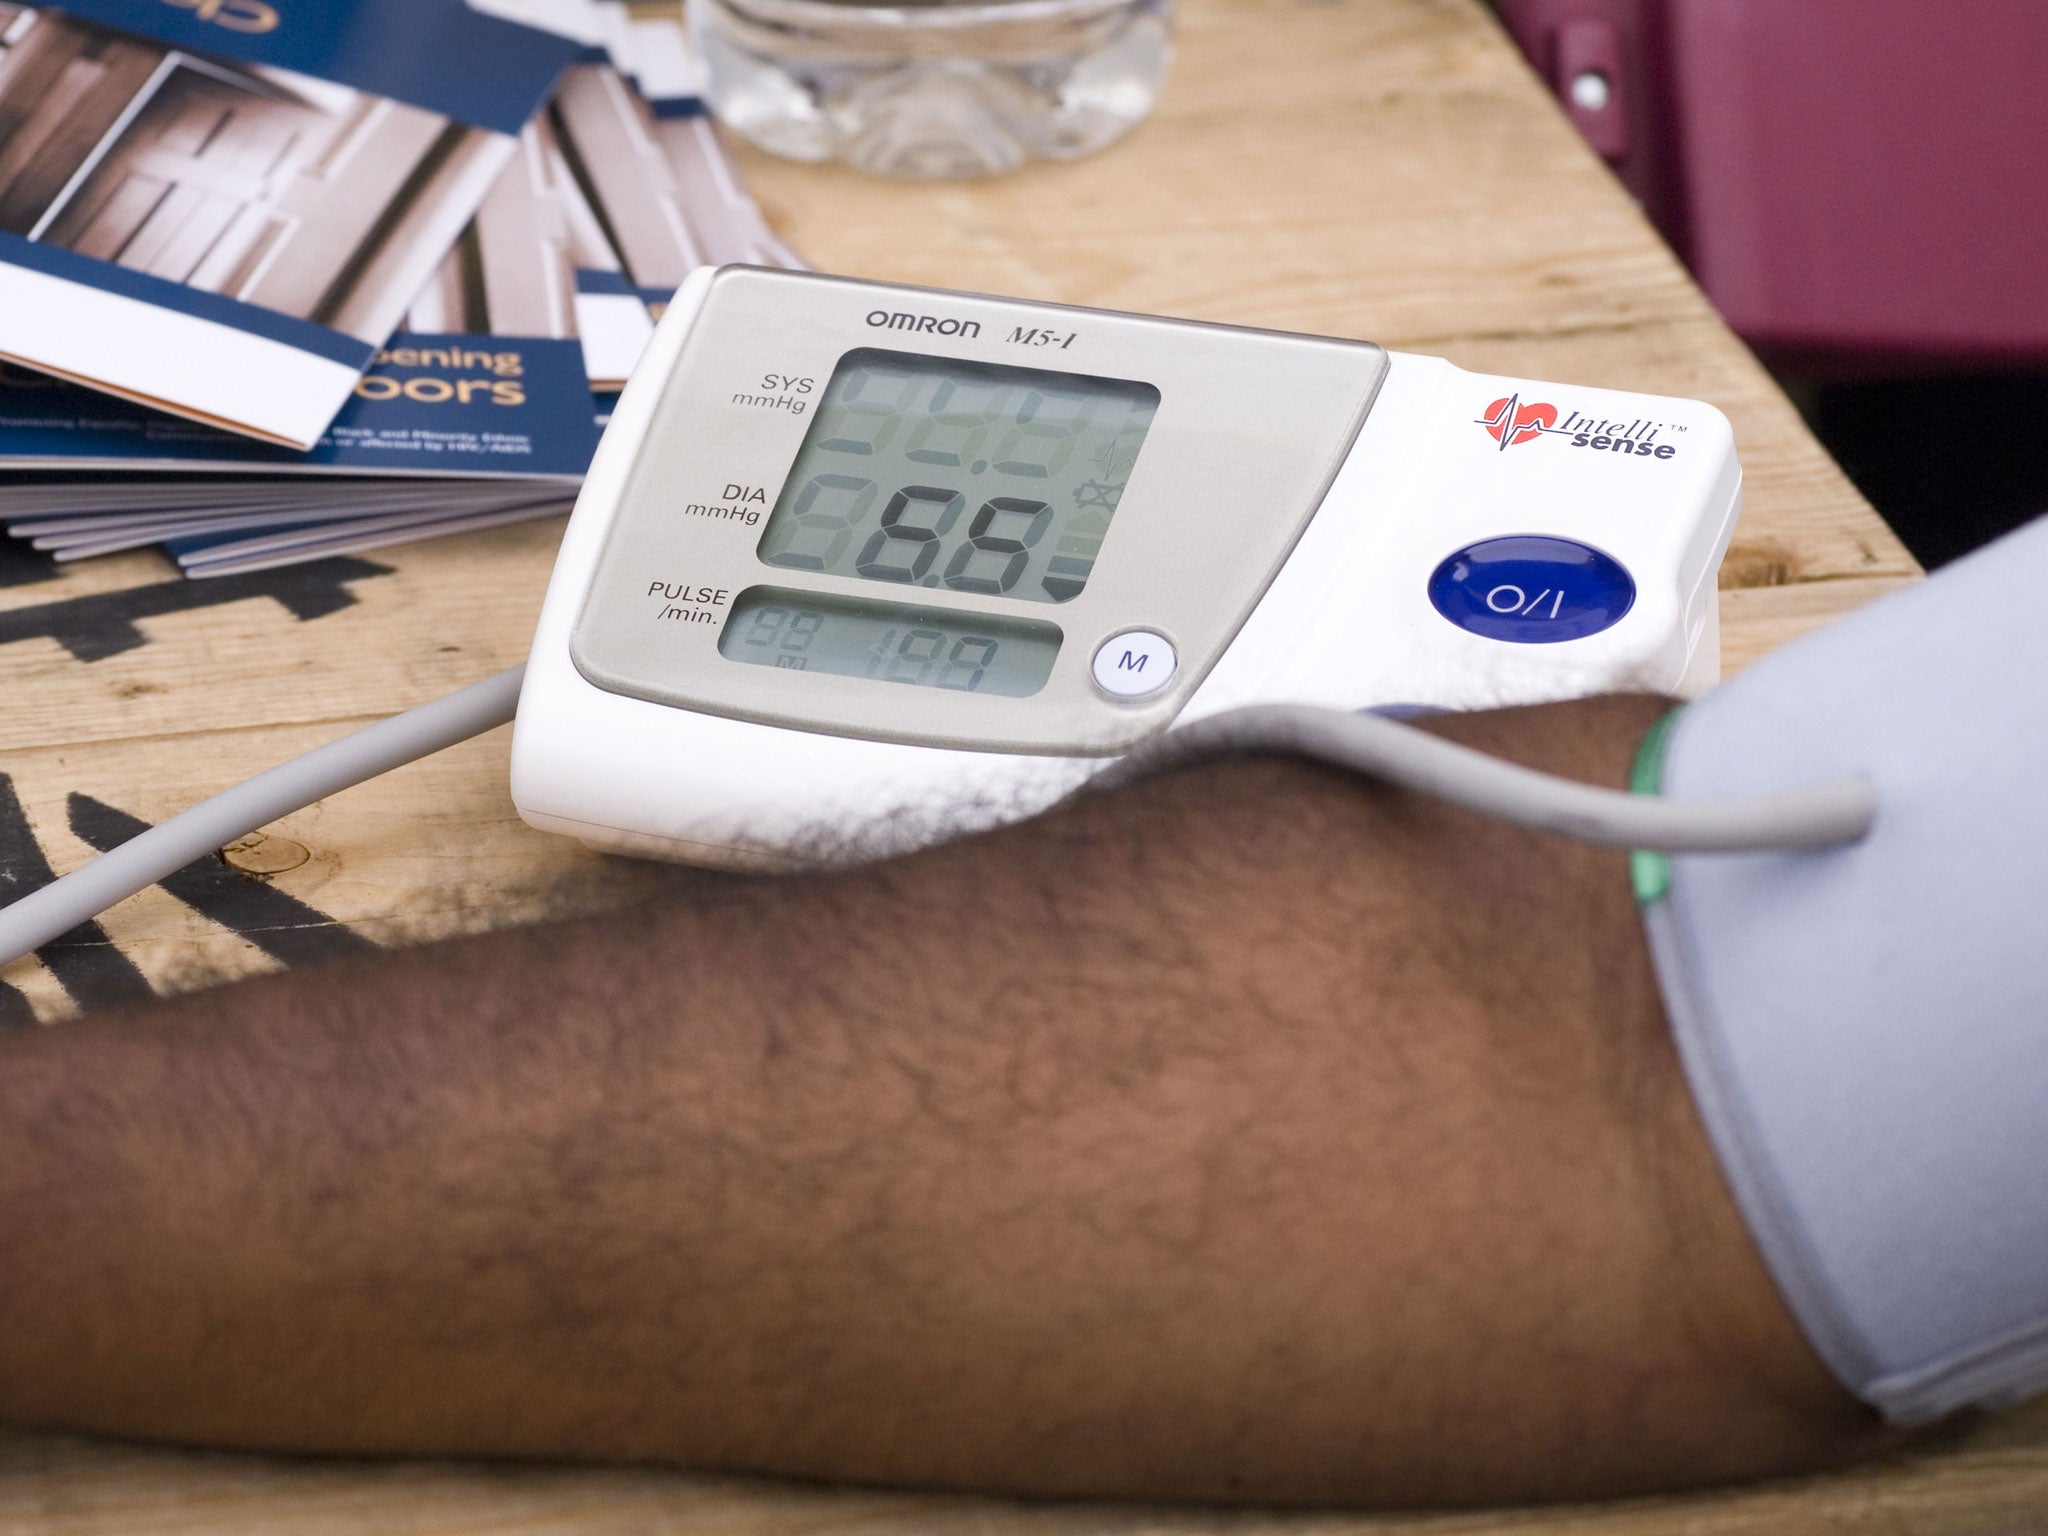 Checks, including blood pressure, can save 650 lives a year